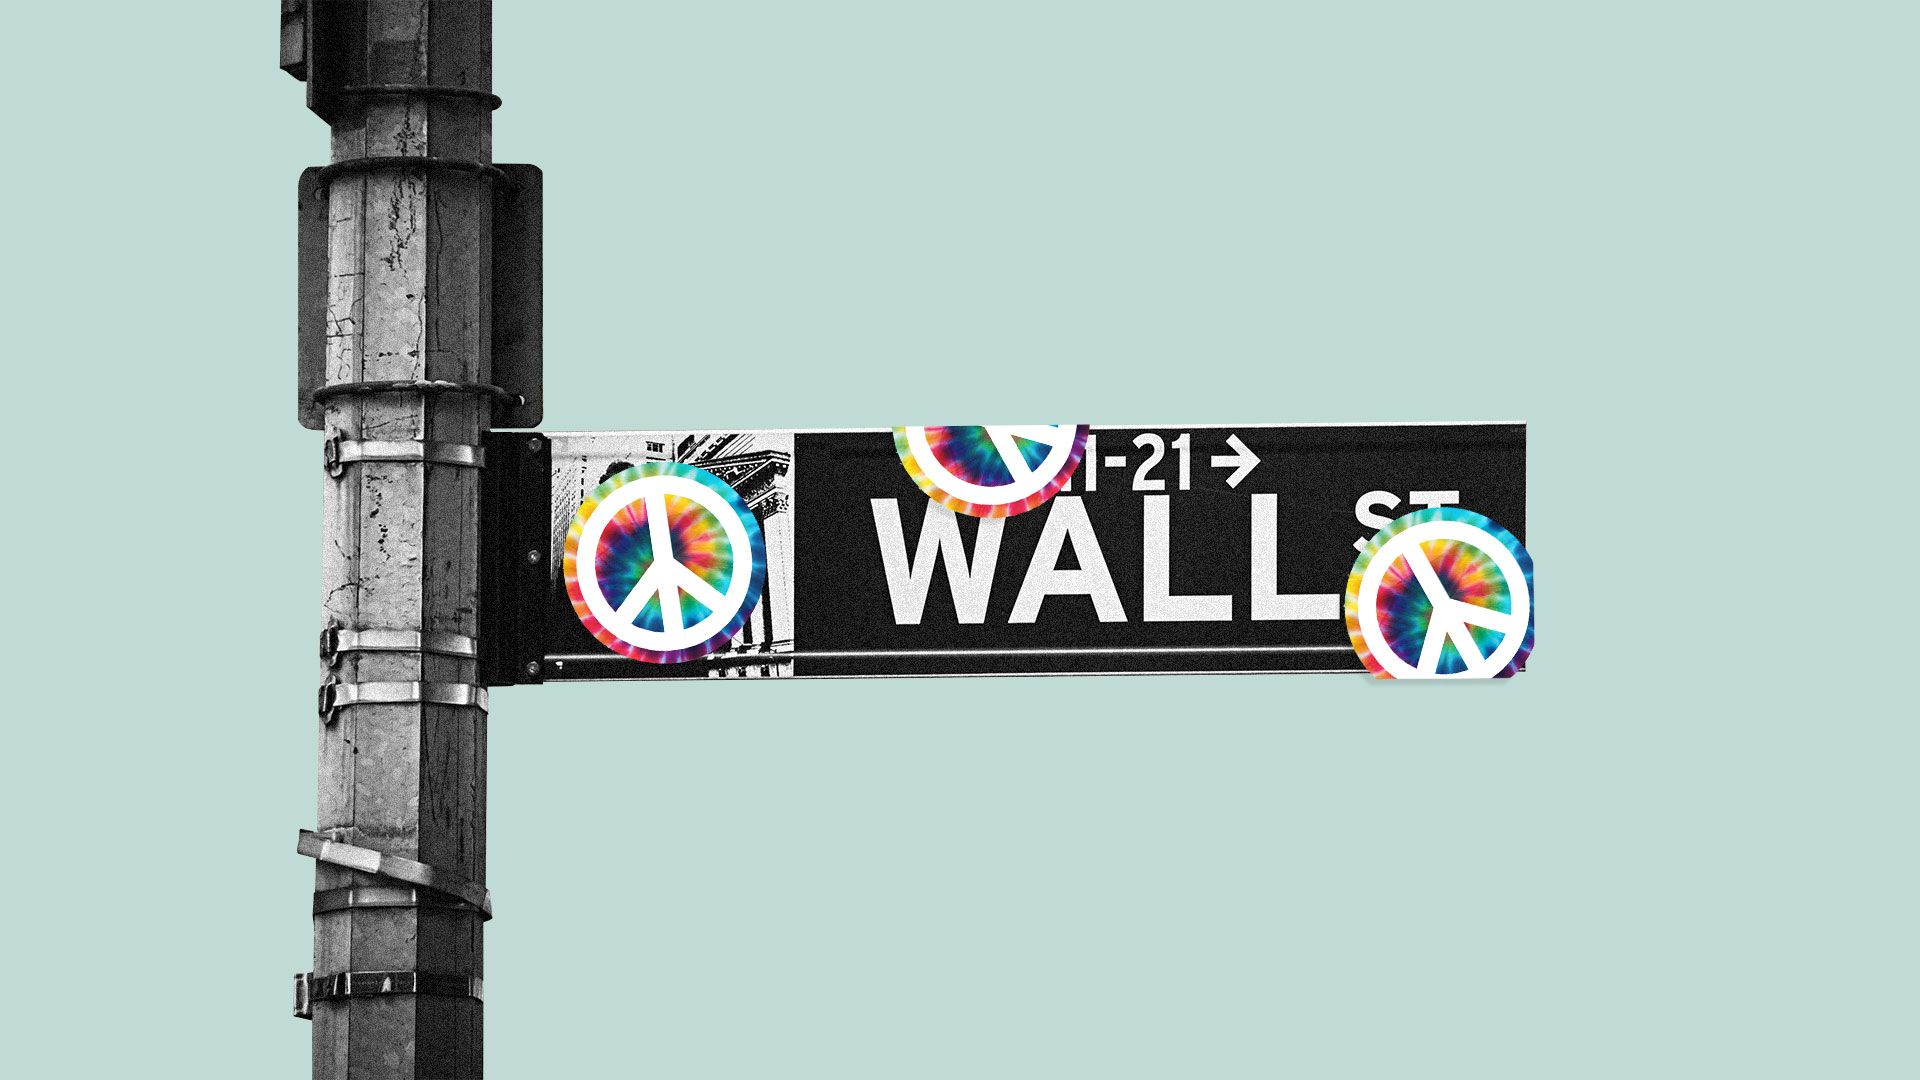 Illustration of the Wall Street sign with peace sign stickers all over it